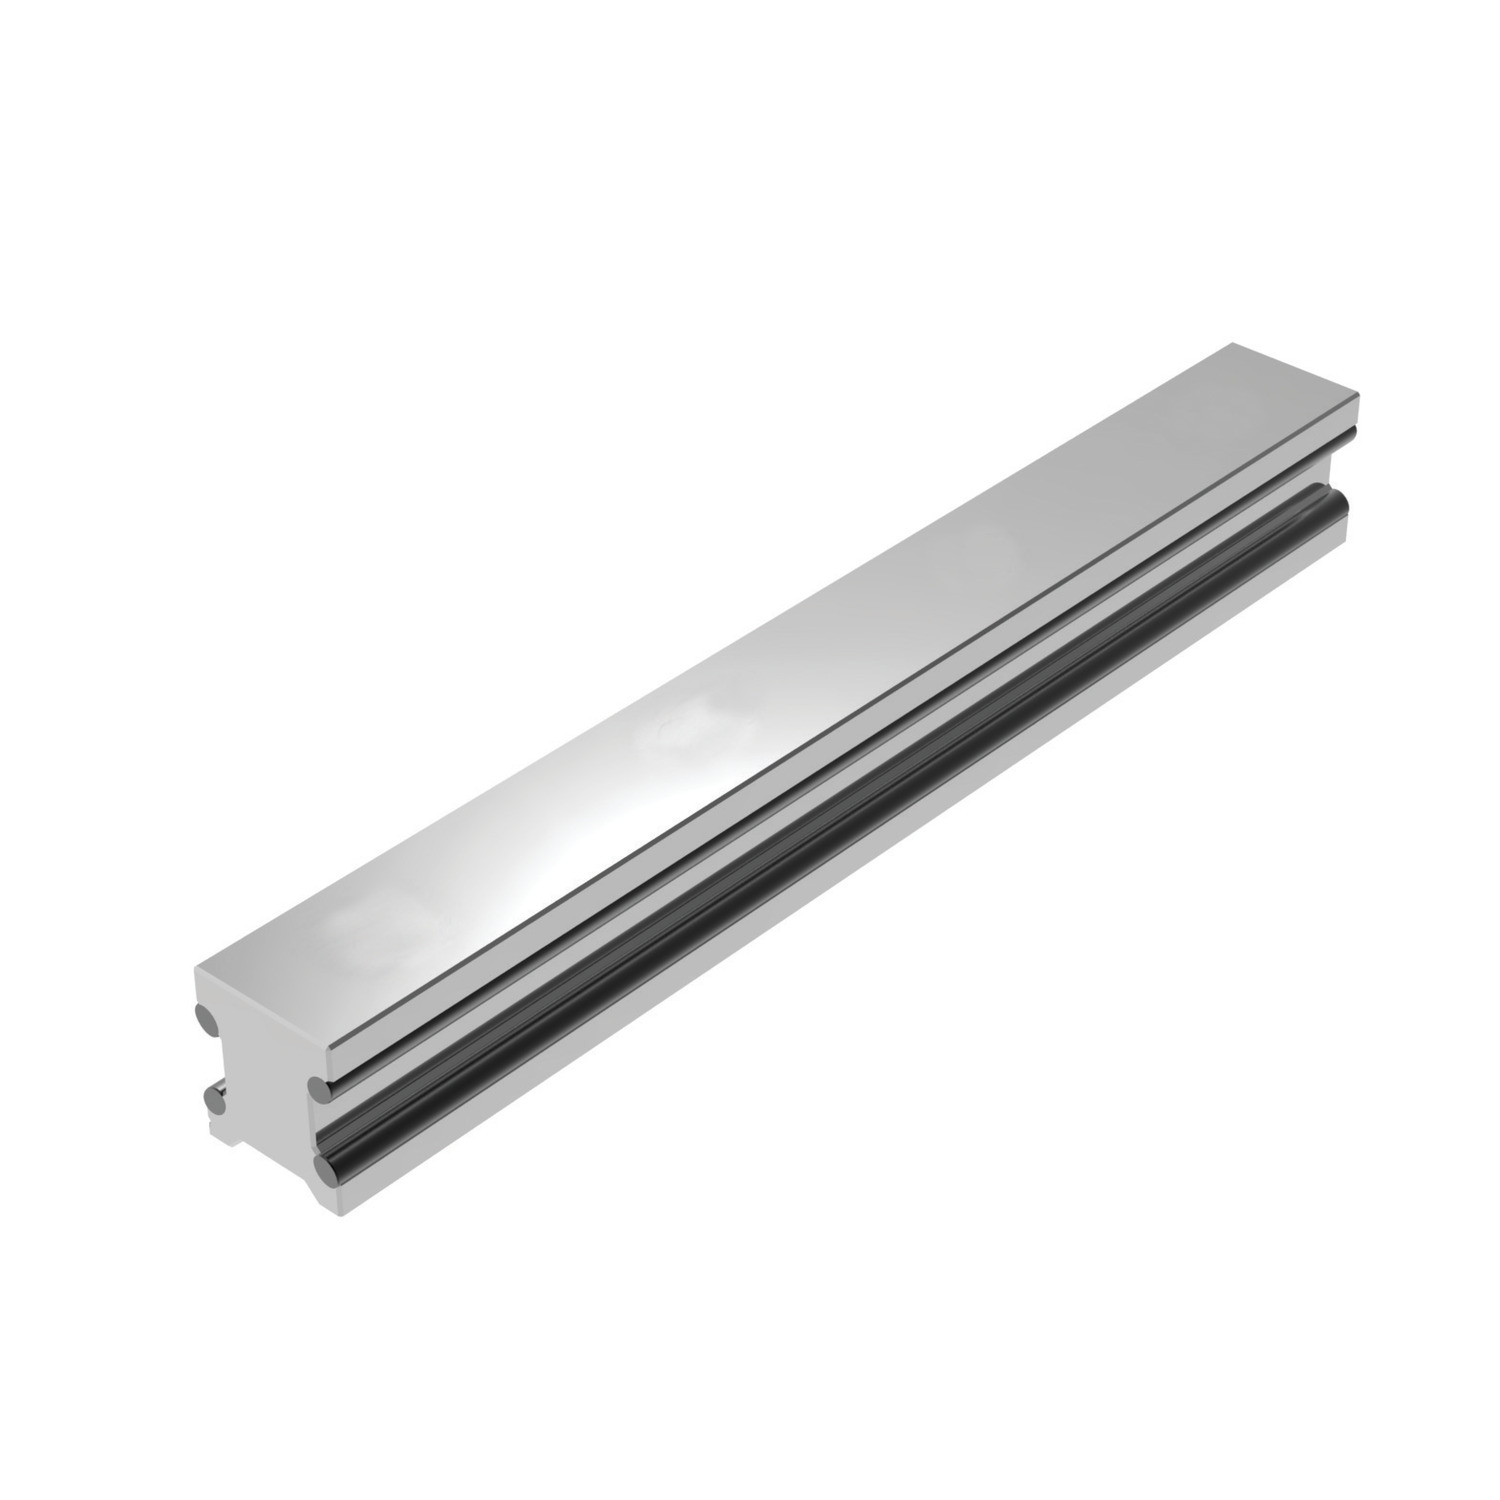 Product L1018.25, 25mm Aluminium Linear Guide Rail rear fixing with stainless raceways / 